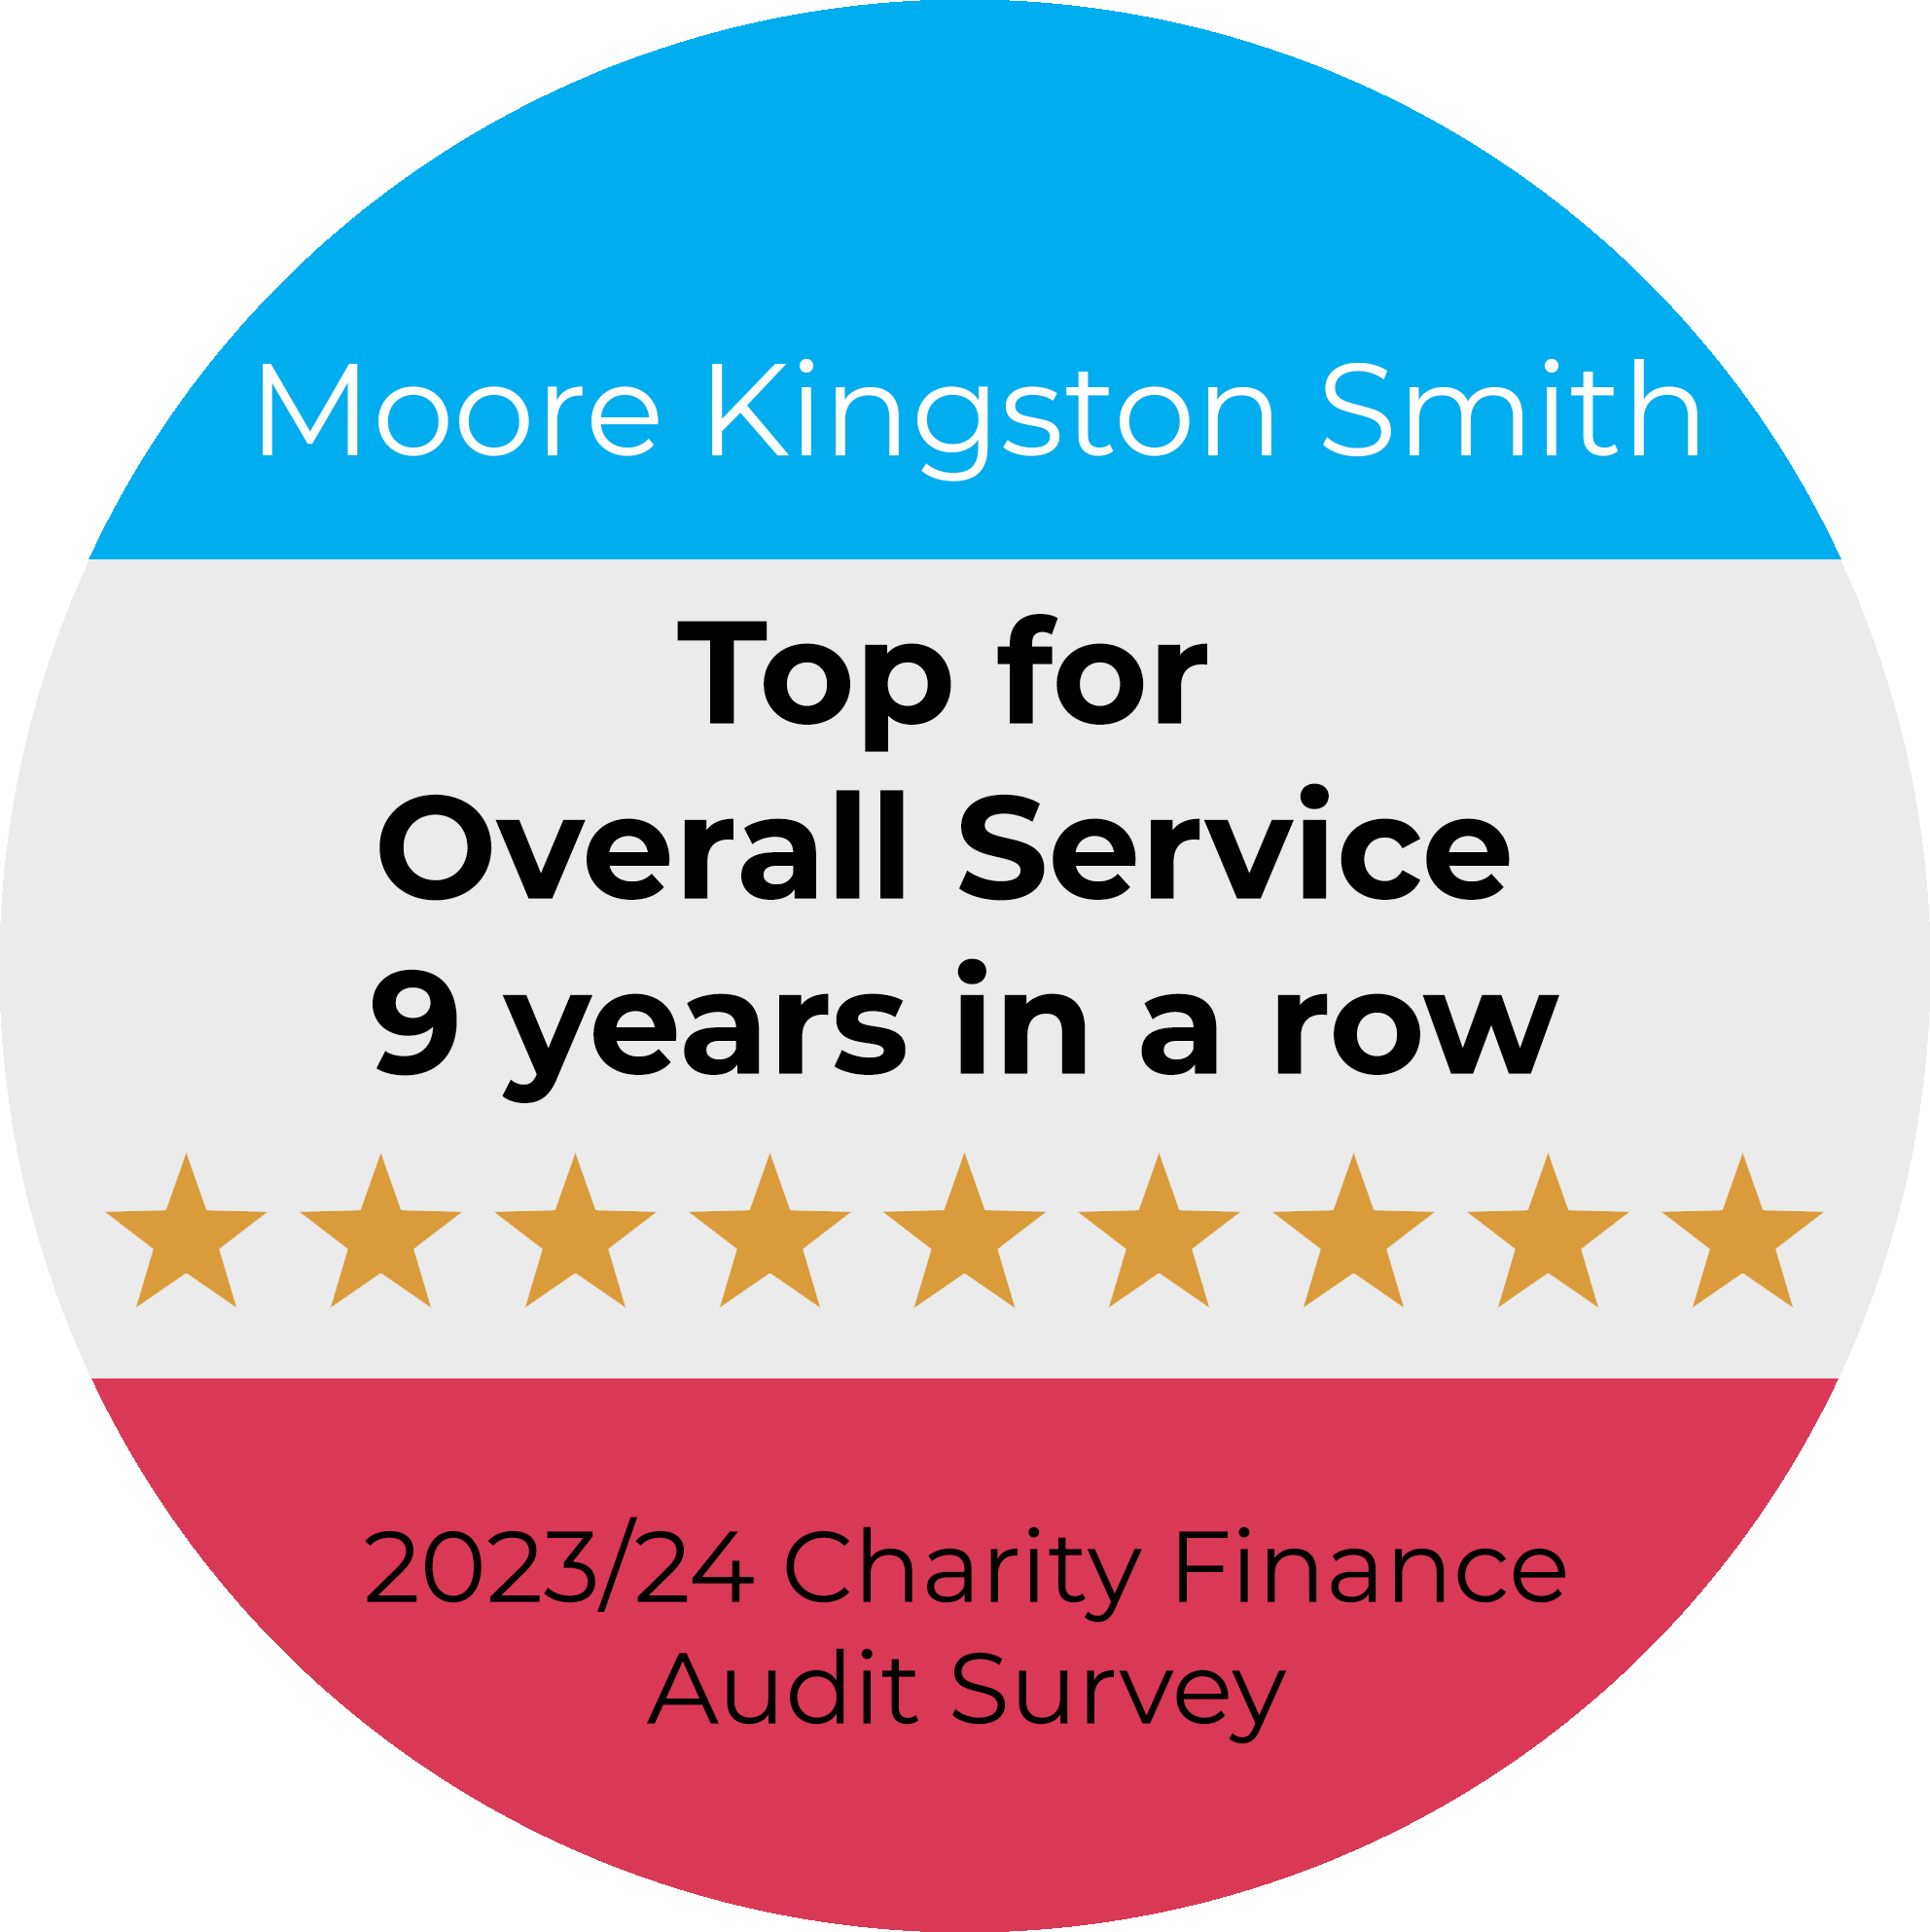 Top for Overall Service for charity finance services